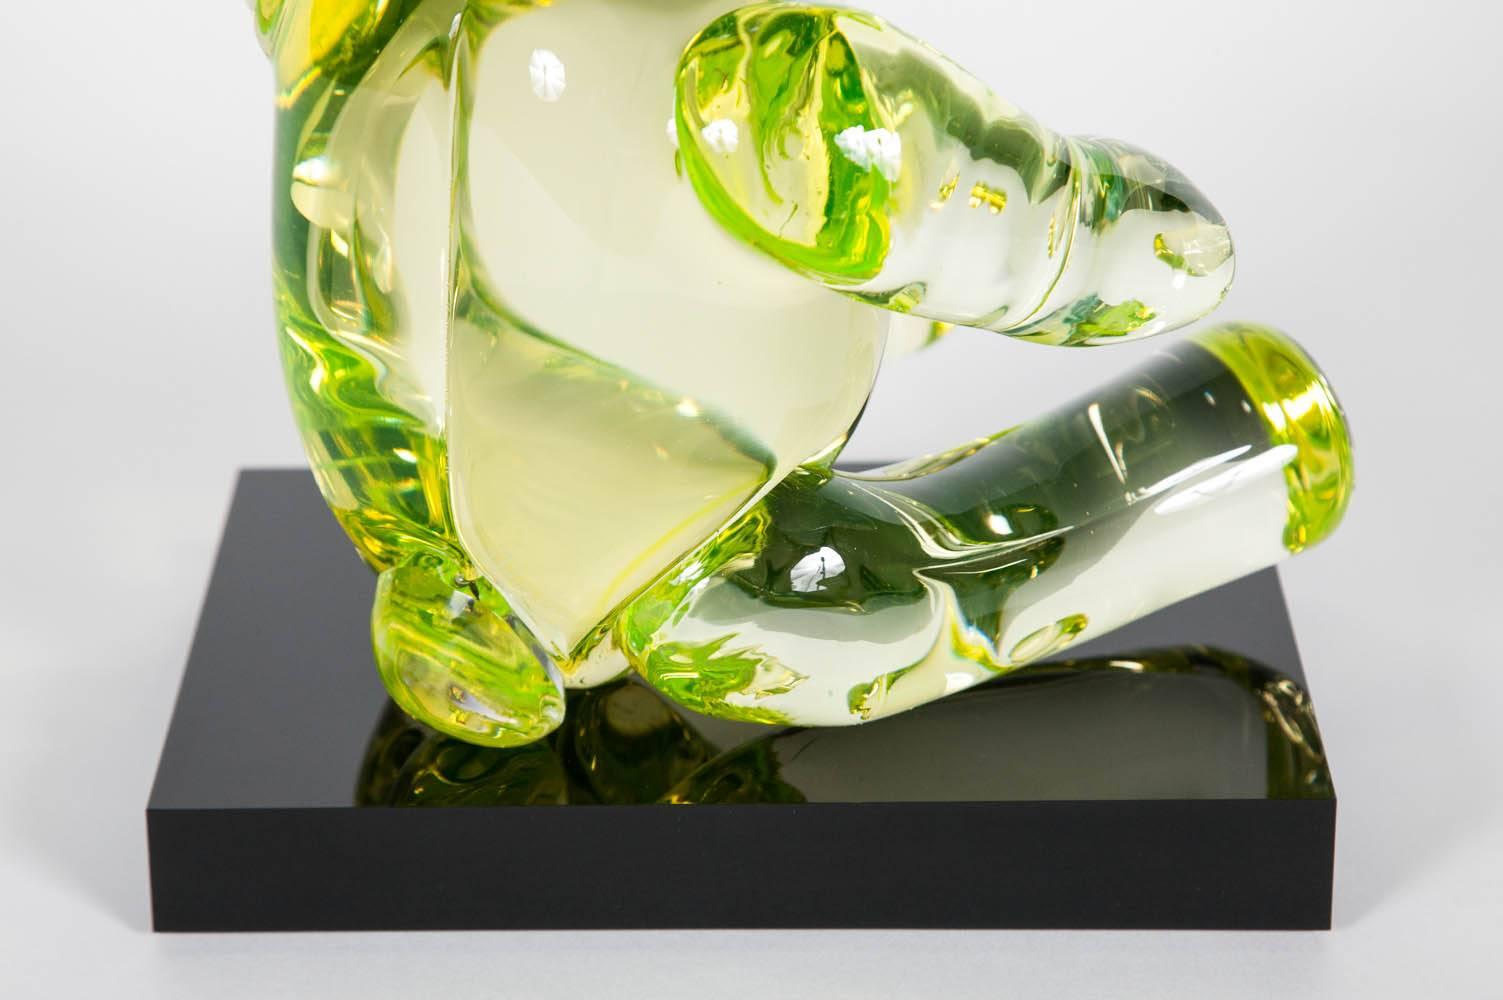 Other Bear, a unique lime green glass sculpted animal figurine by Elliot Walker